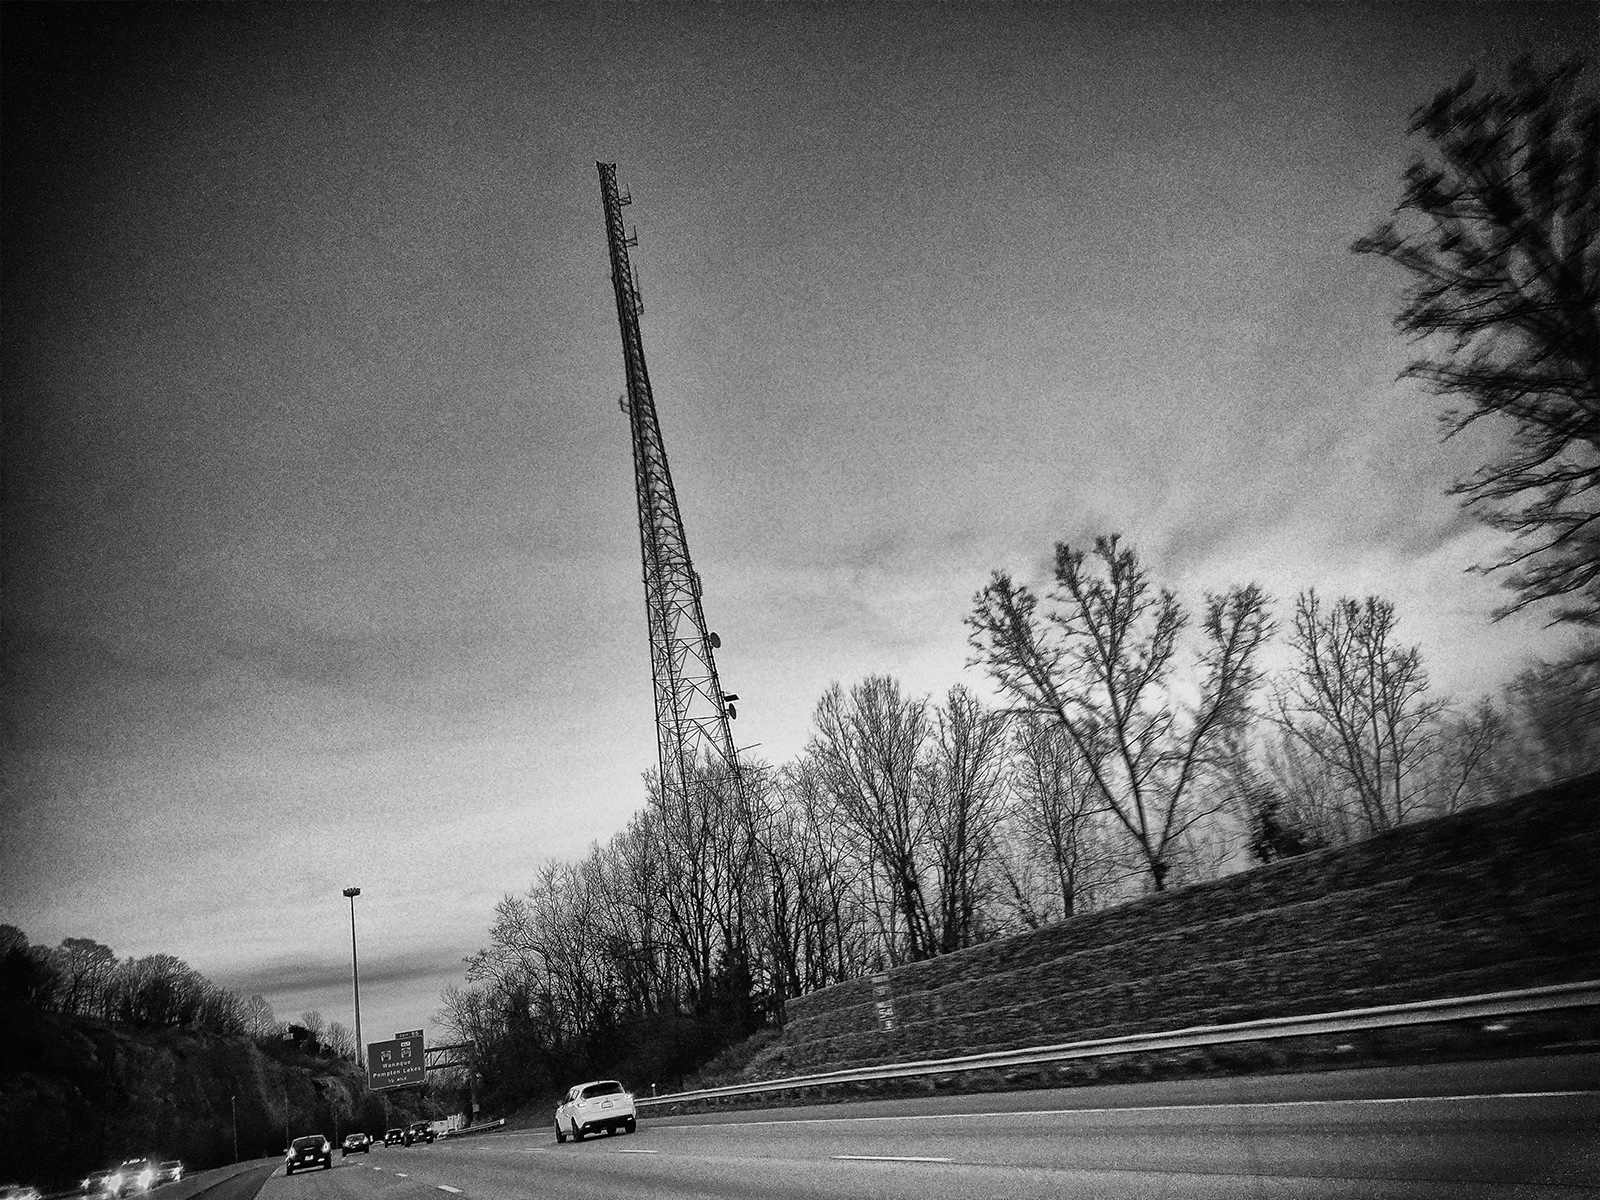 cell tower ©2020 by bret wills